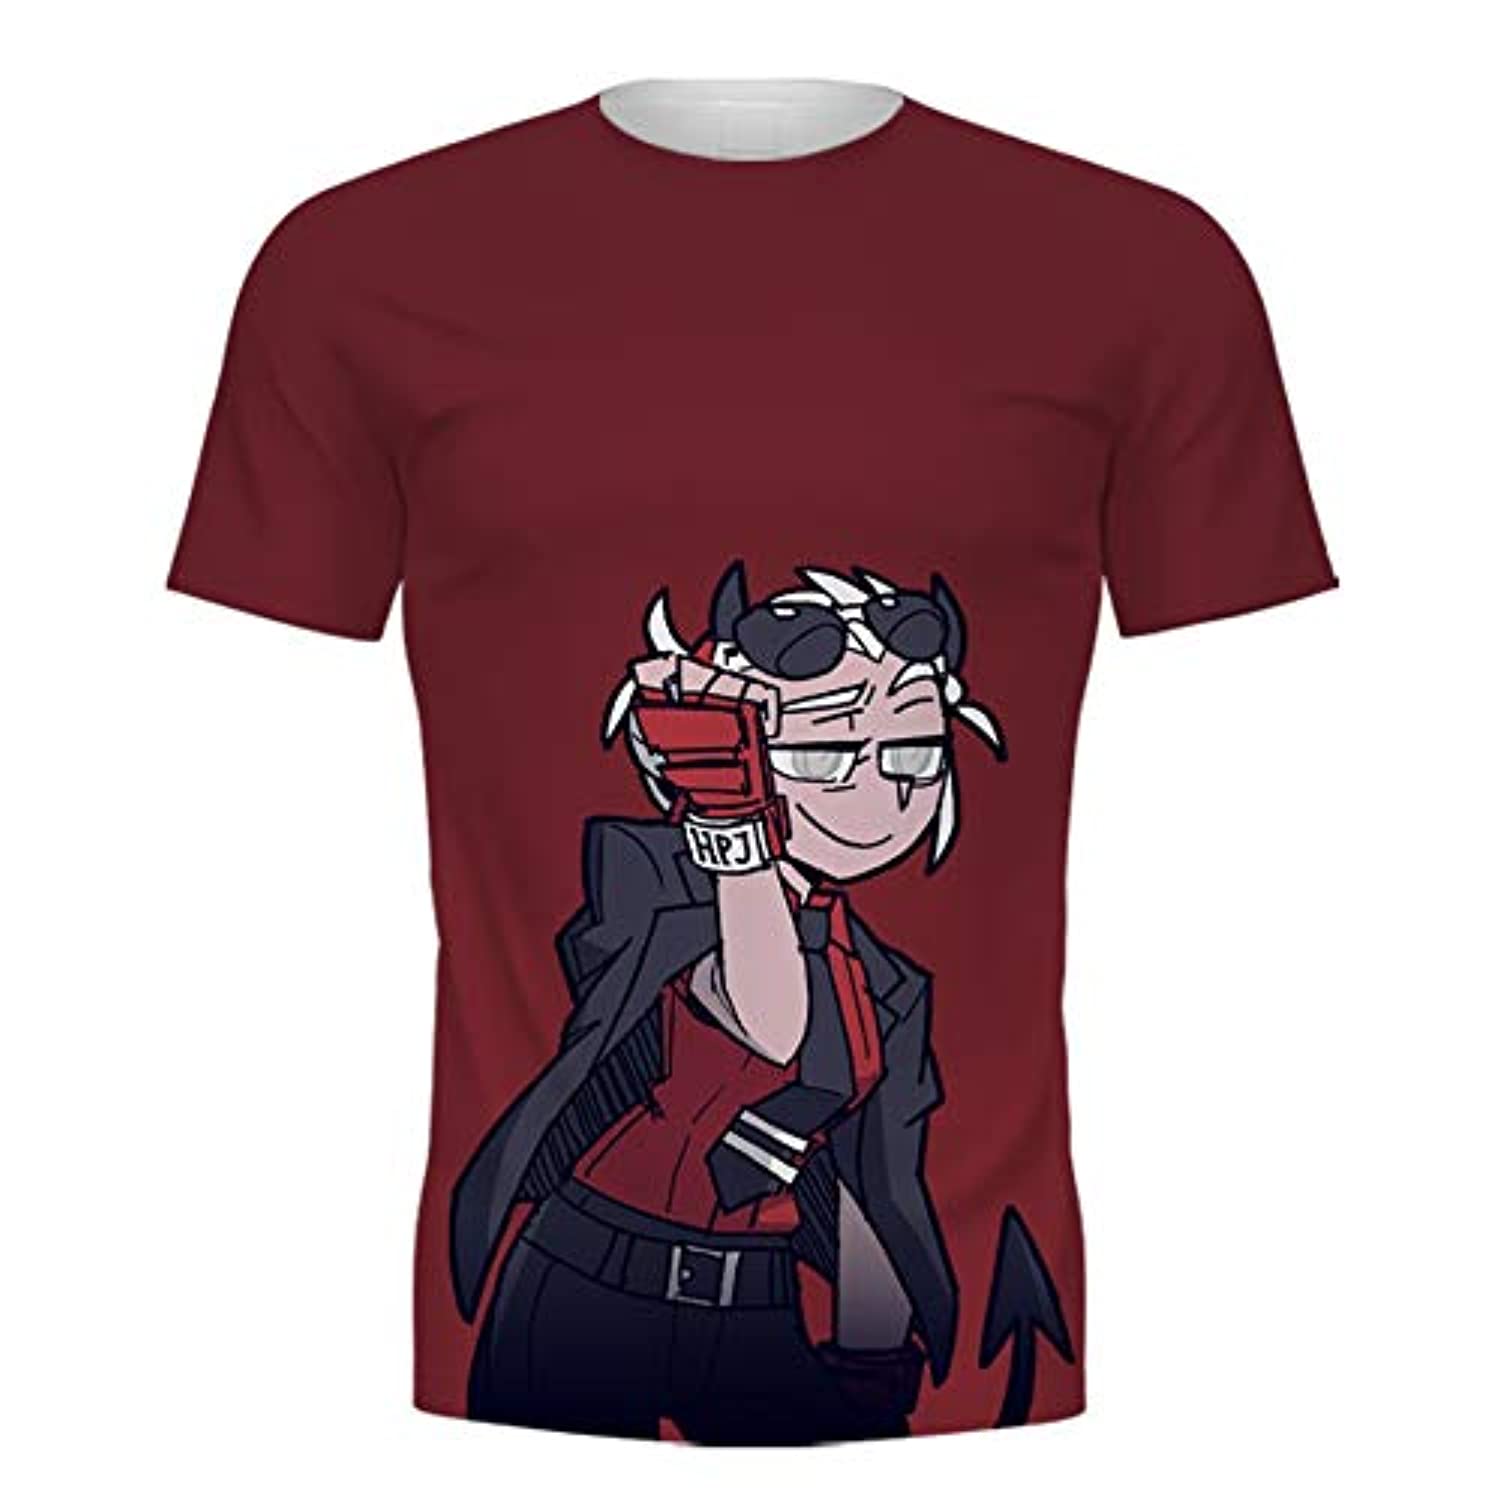 Helltaker Shirt - Justice Short Sleeve Casual Tops T-Shirts for Adult ...